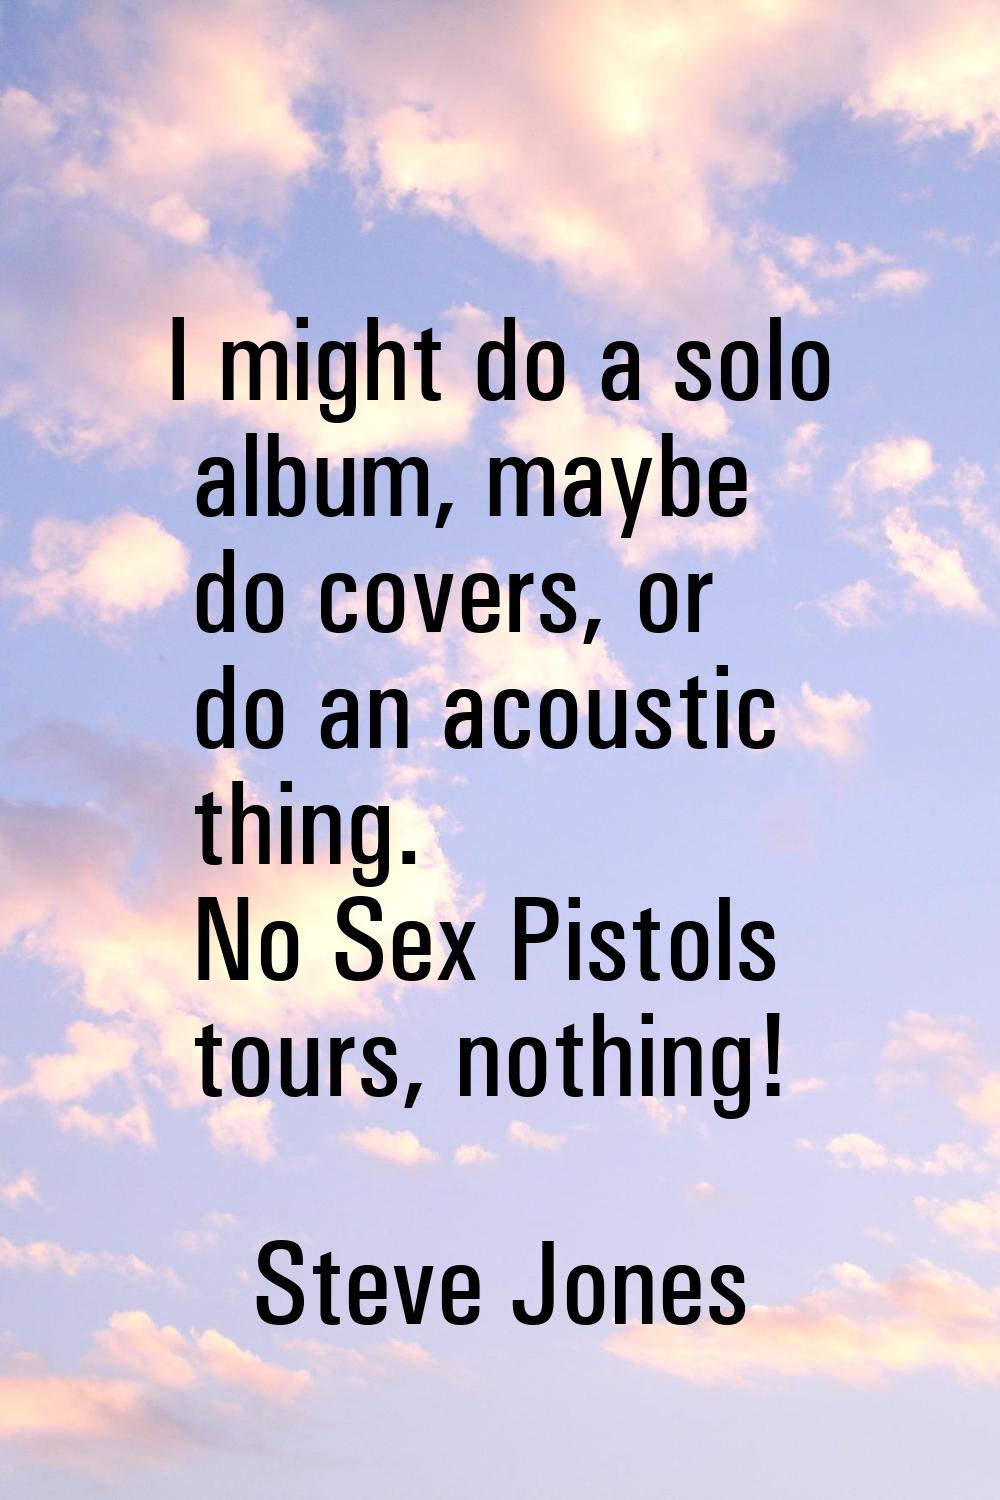 I might do a solo album, maybe do covers, or do an acoustic thing. No Sex Pistols tours, nothing!